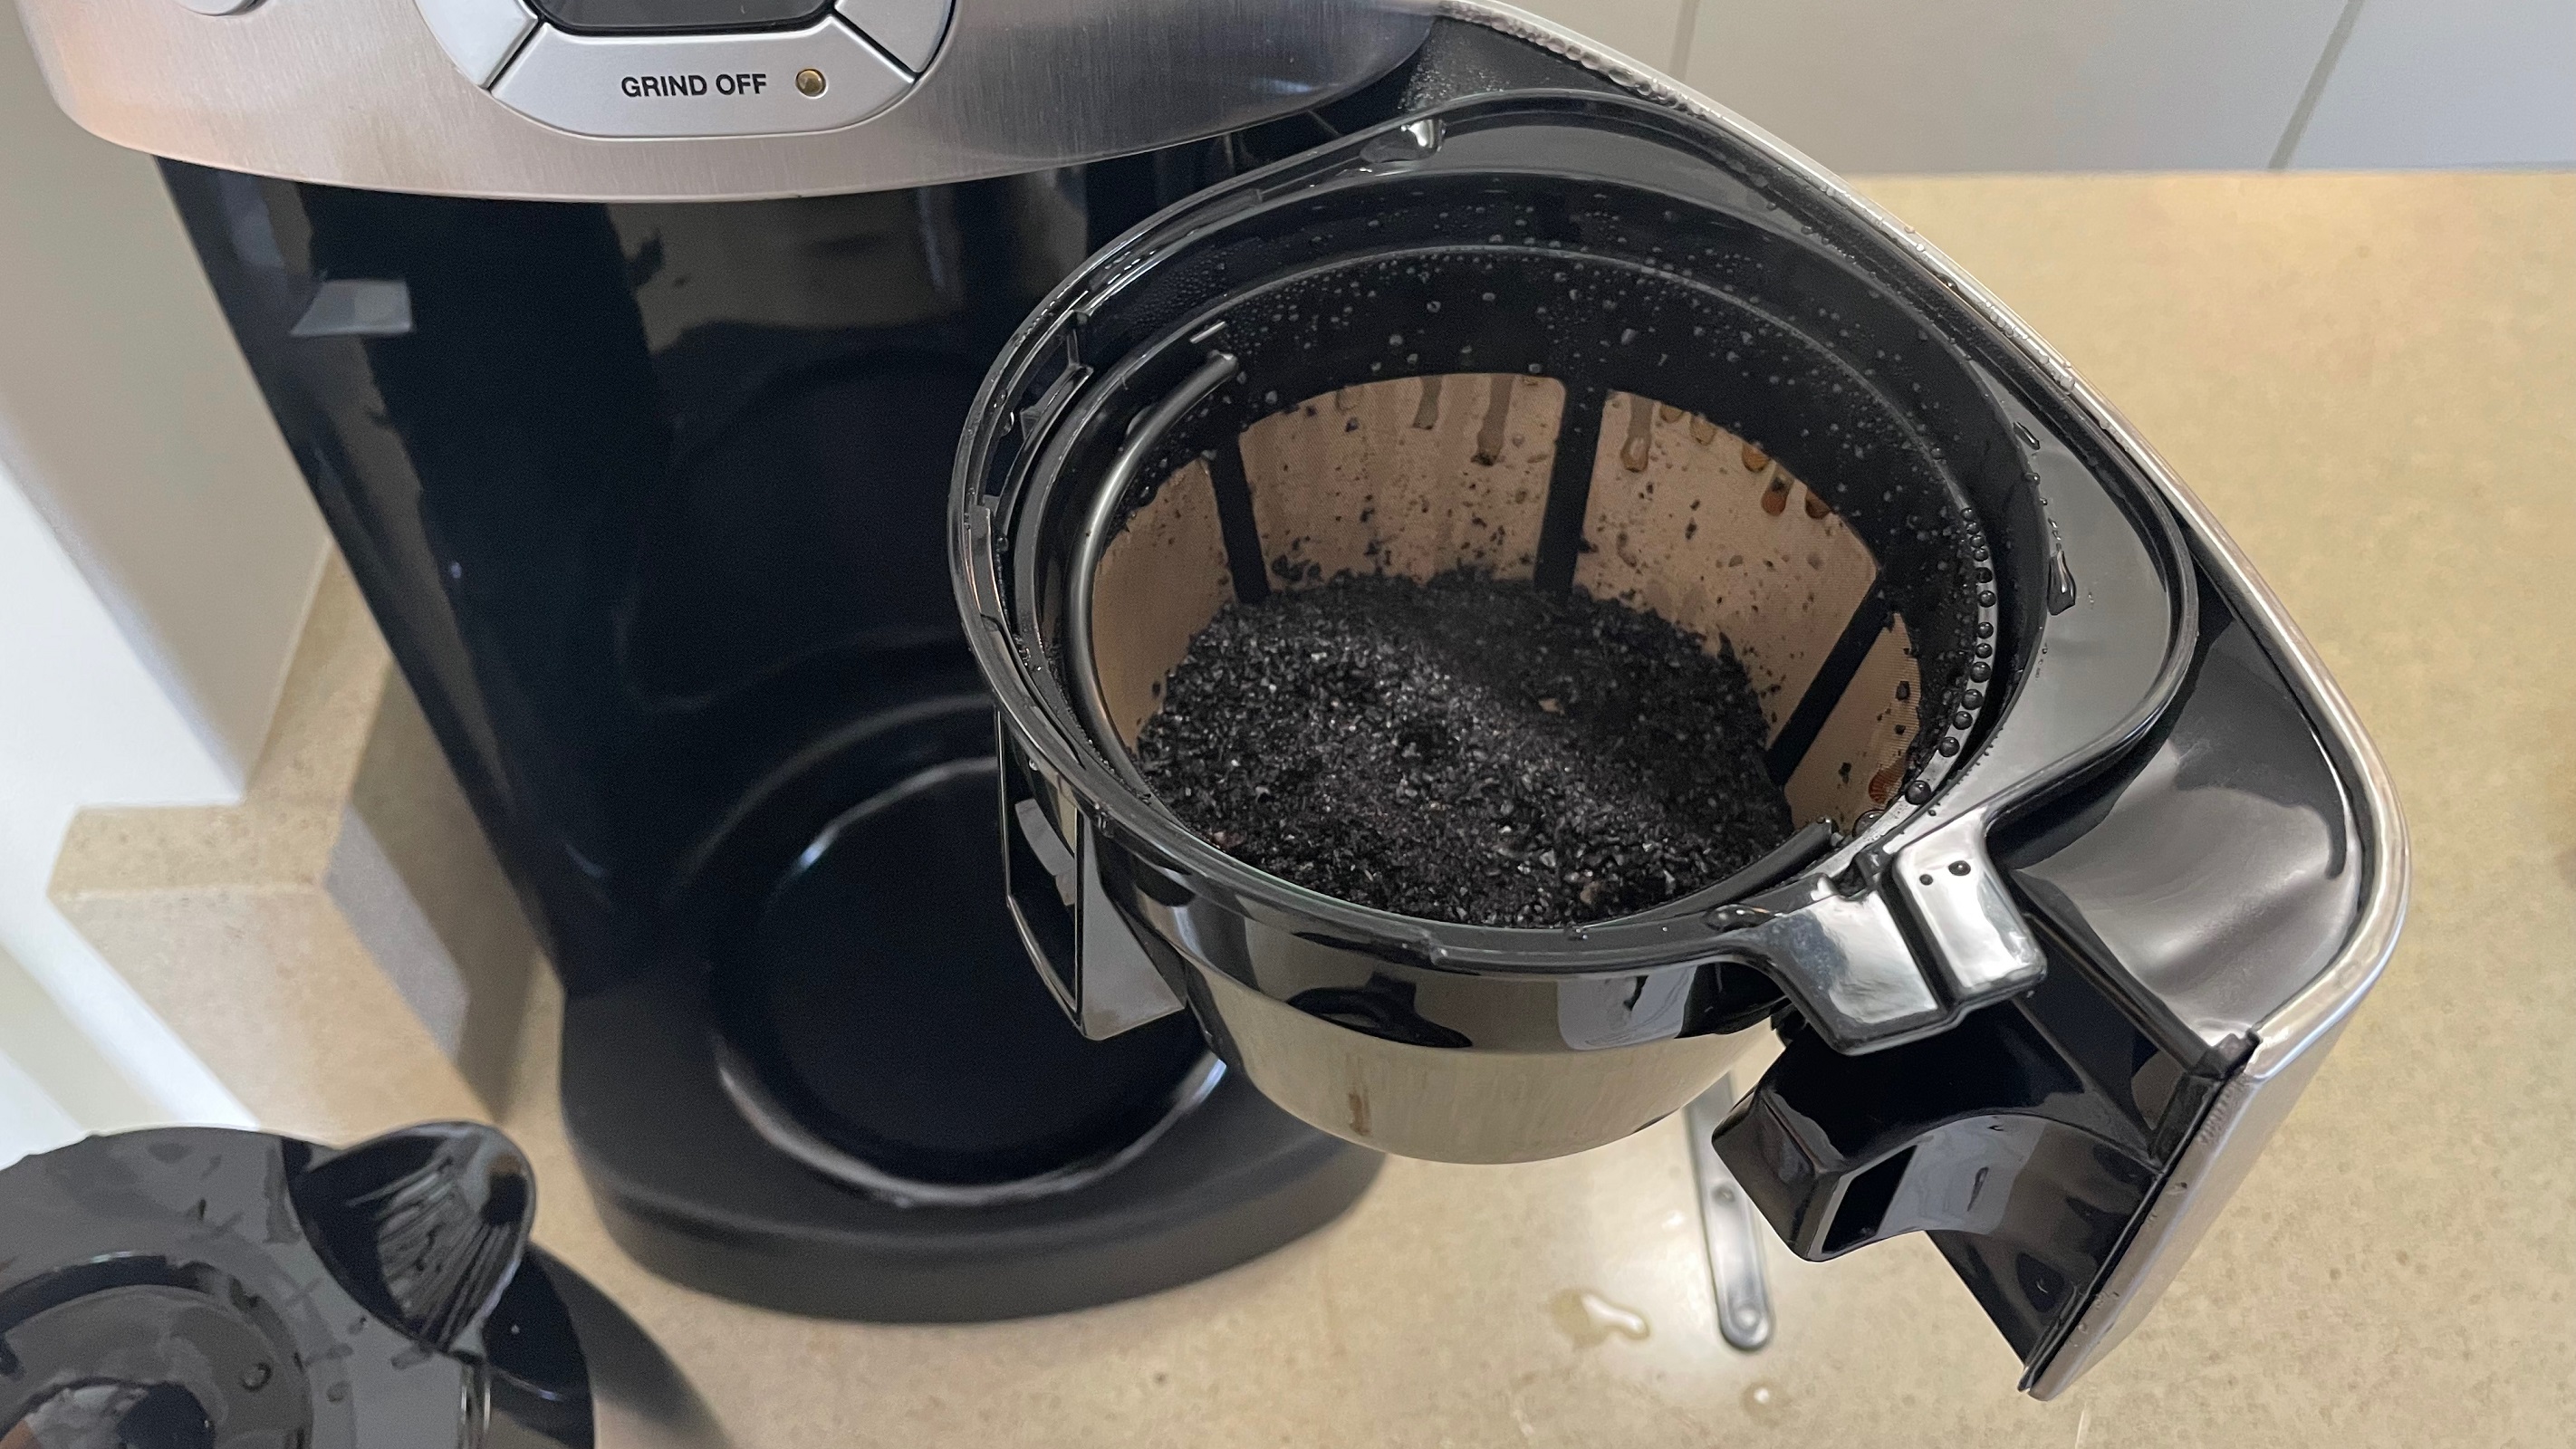 Empty the grind from the filter on the Cuisinart Grind & Brew